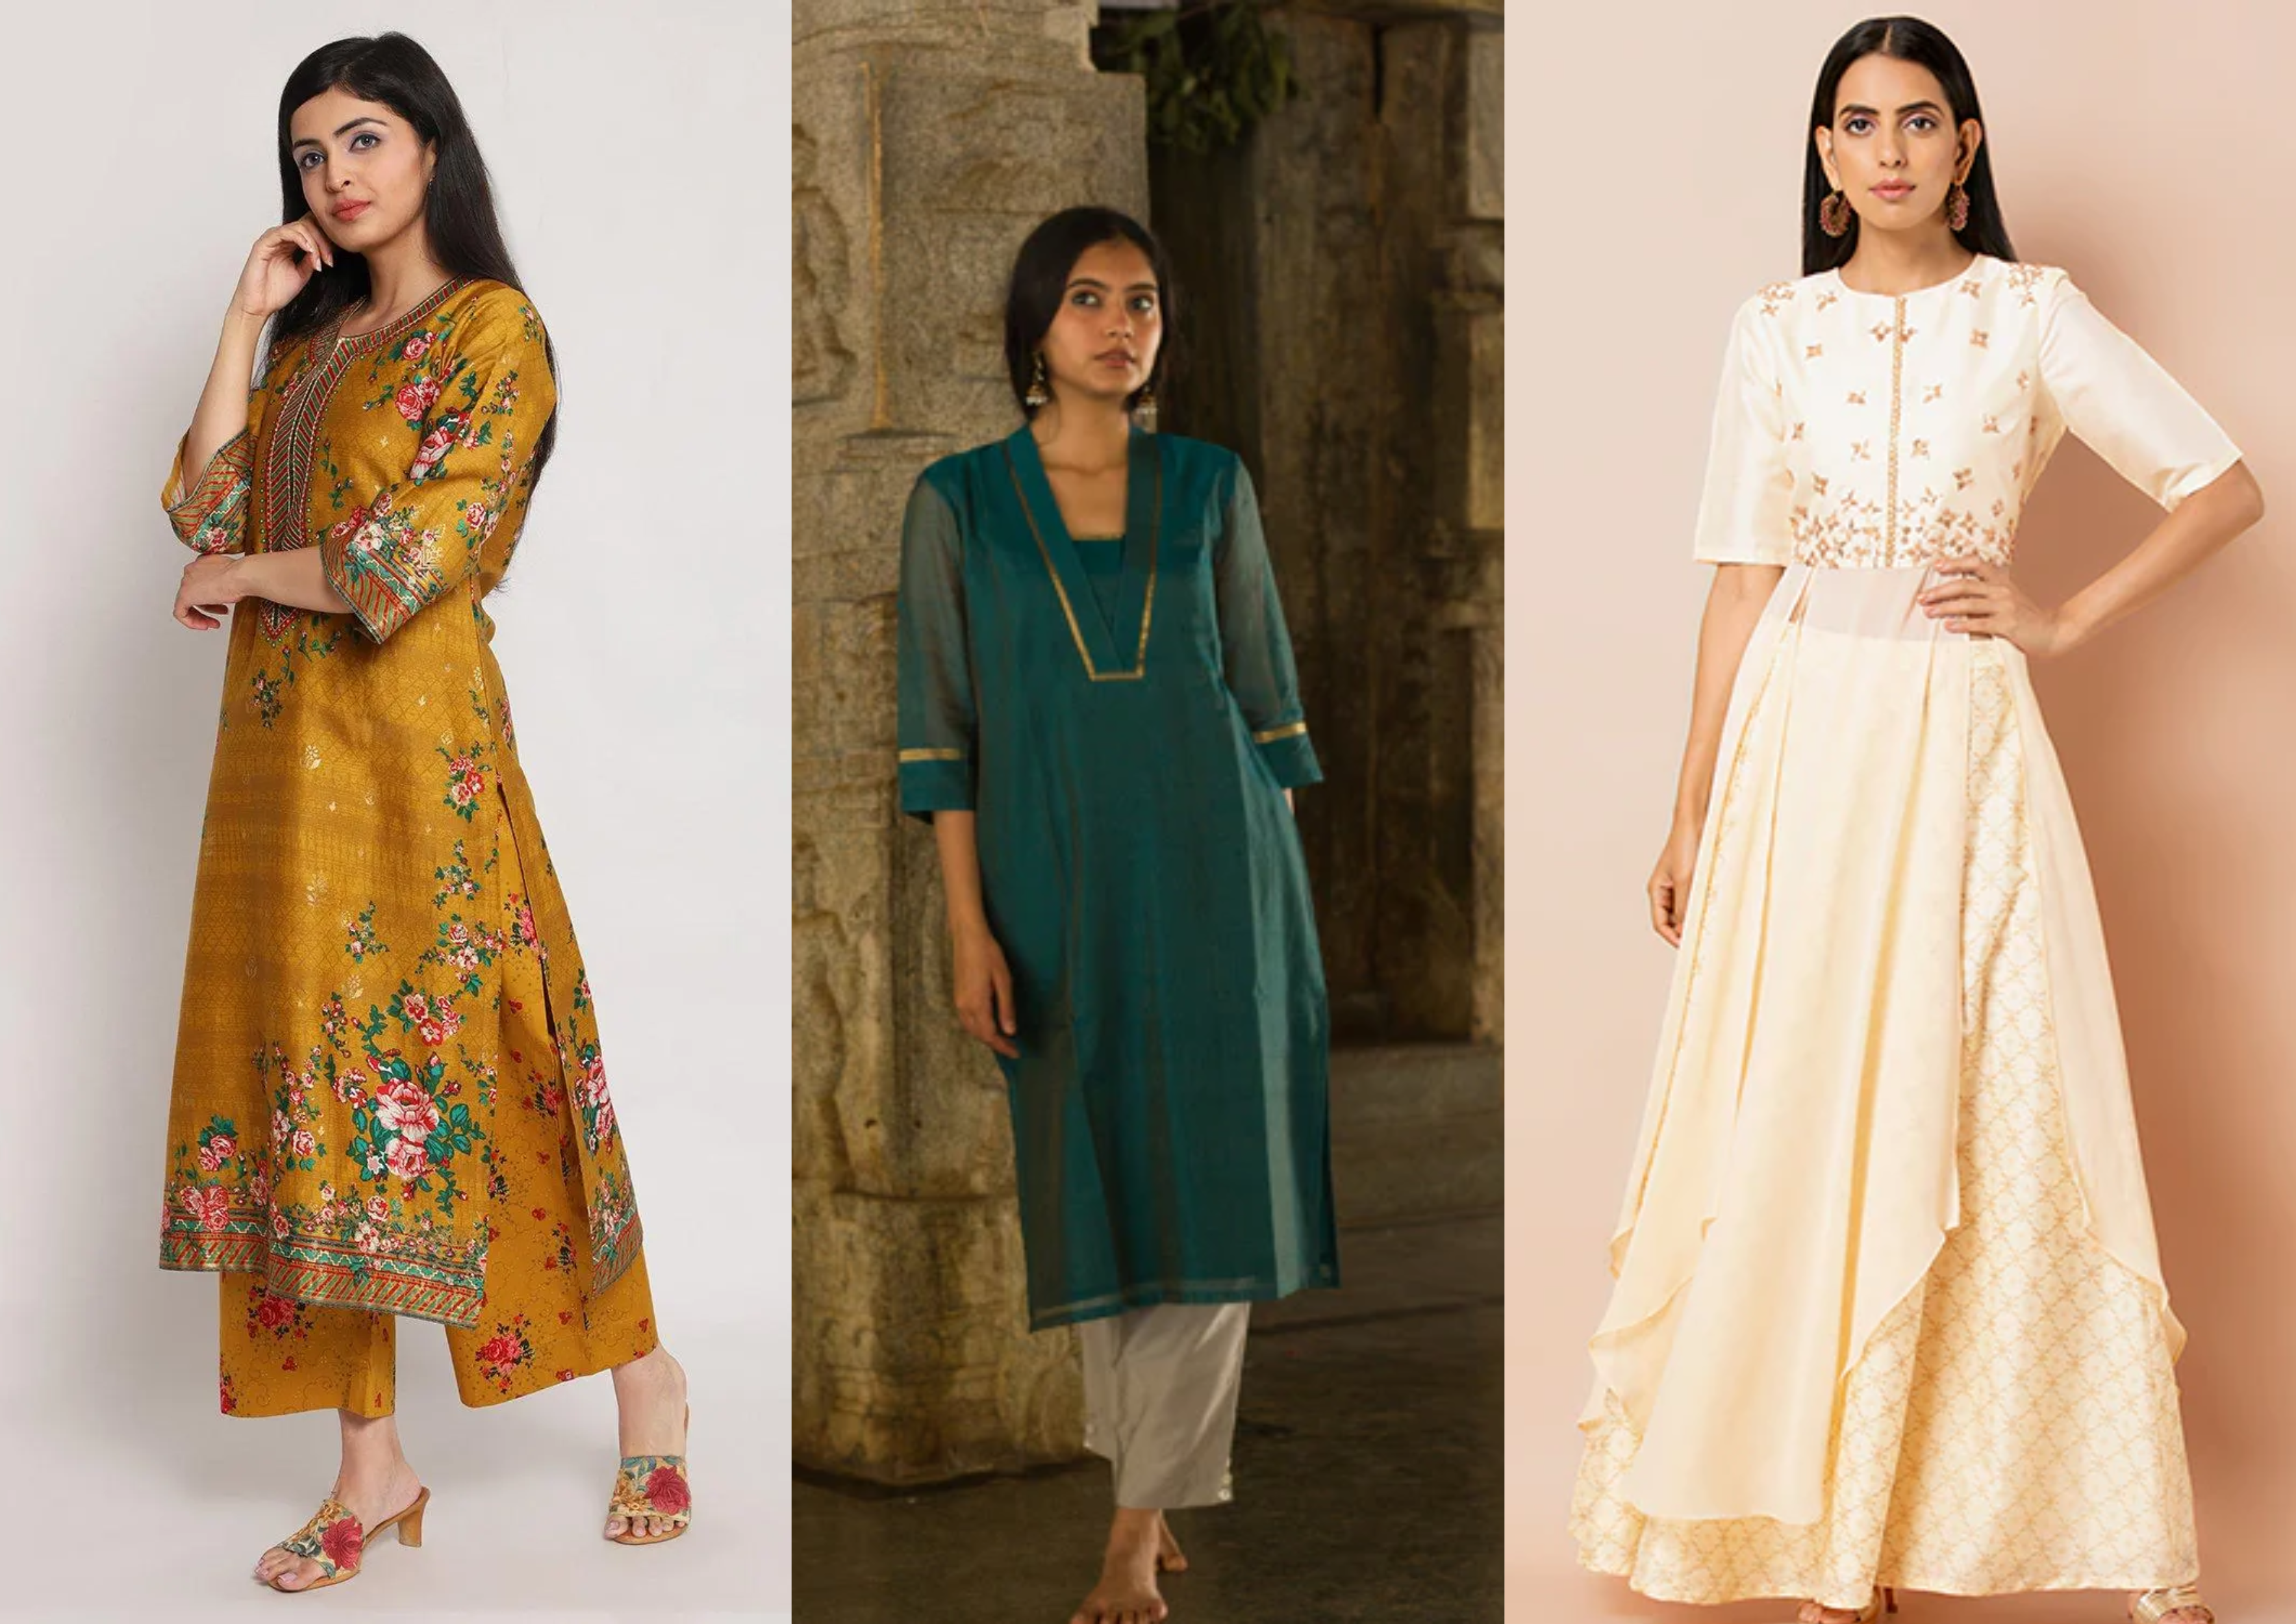 Trio Kurtas under five thousand rupees to complete your Republic Day look 2023